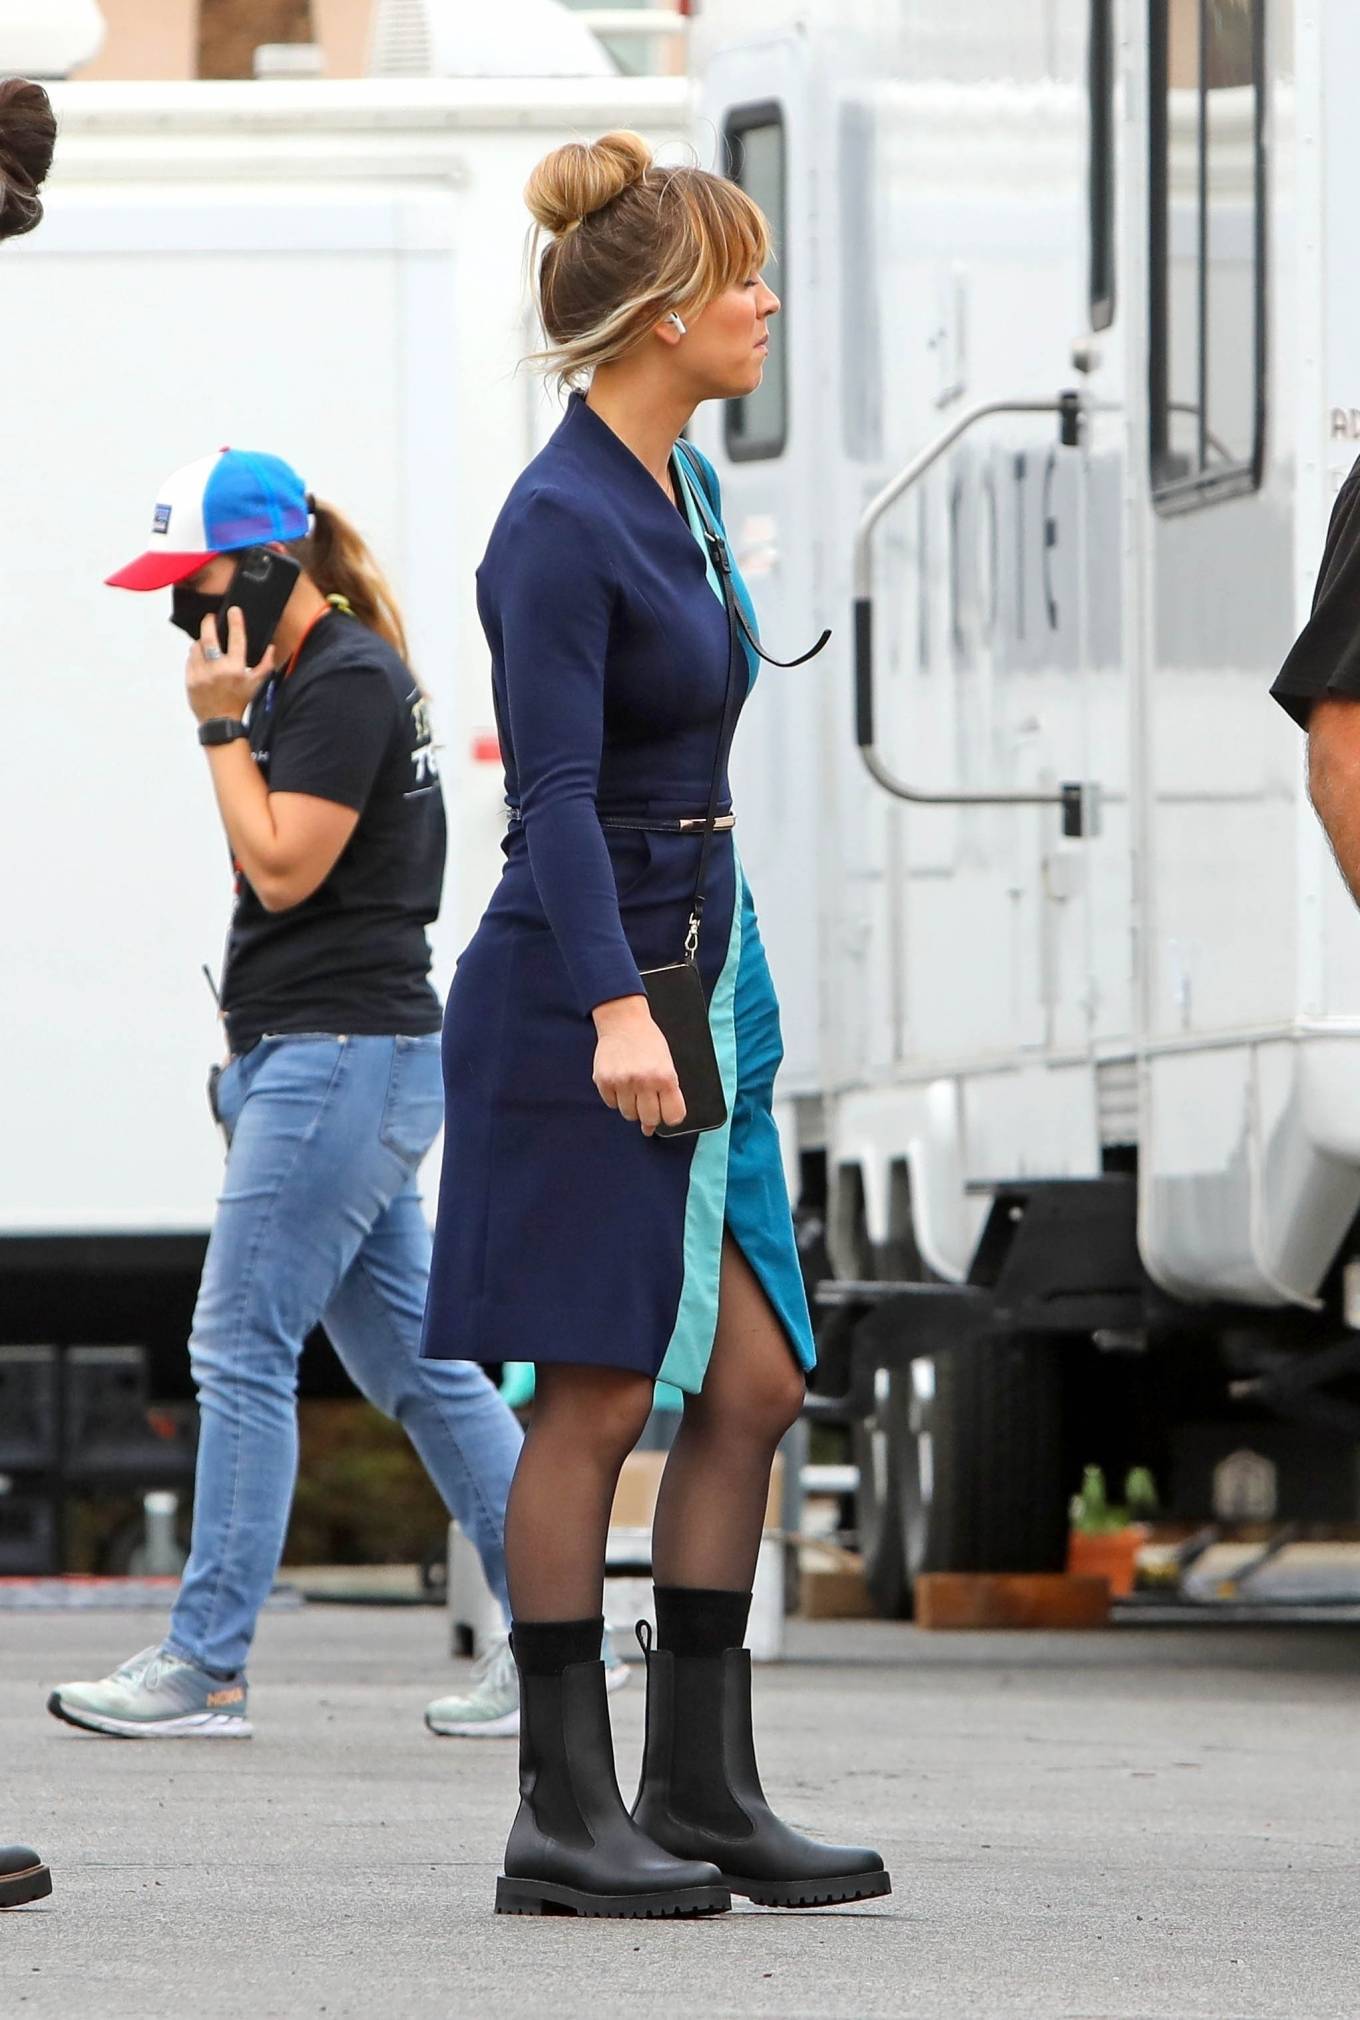 Kaley Cuoco 2021 : Kaley Cuoco – On a break from shooting scenes on the set of The Flight Attendant in Los Angeles-10